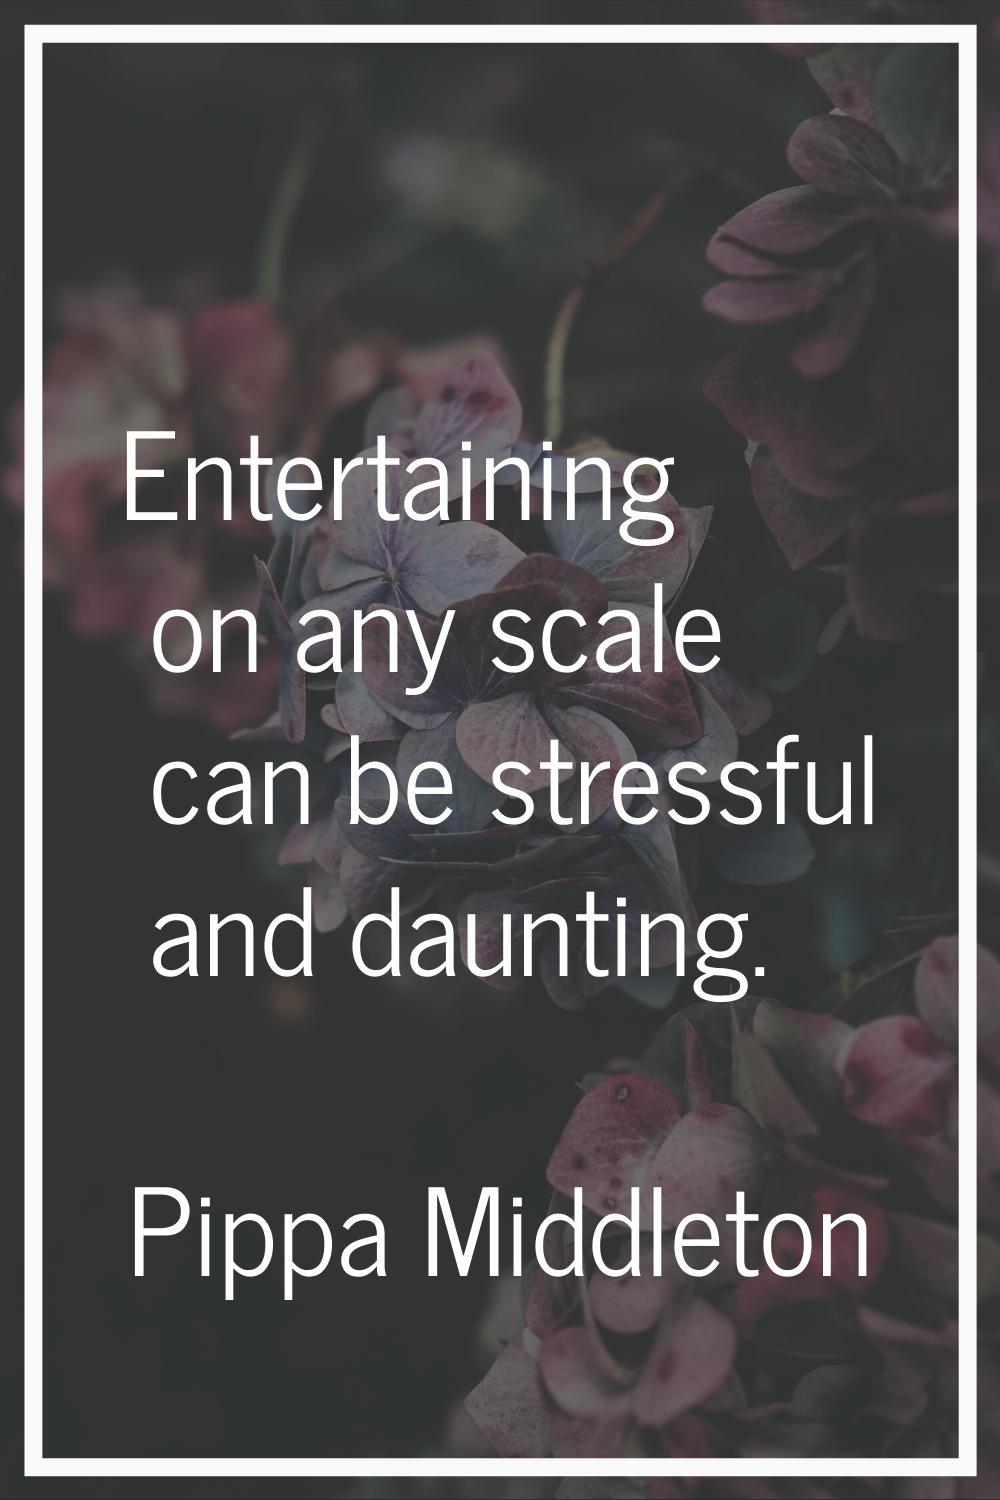 Entertaining on any scale can be stressful and daunting.